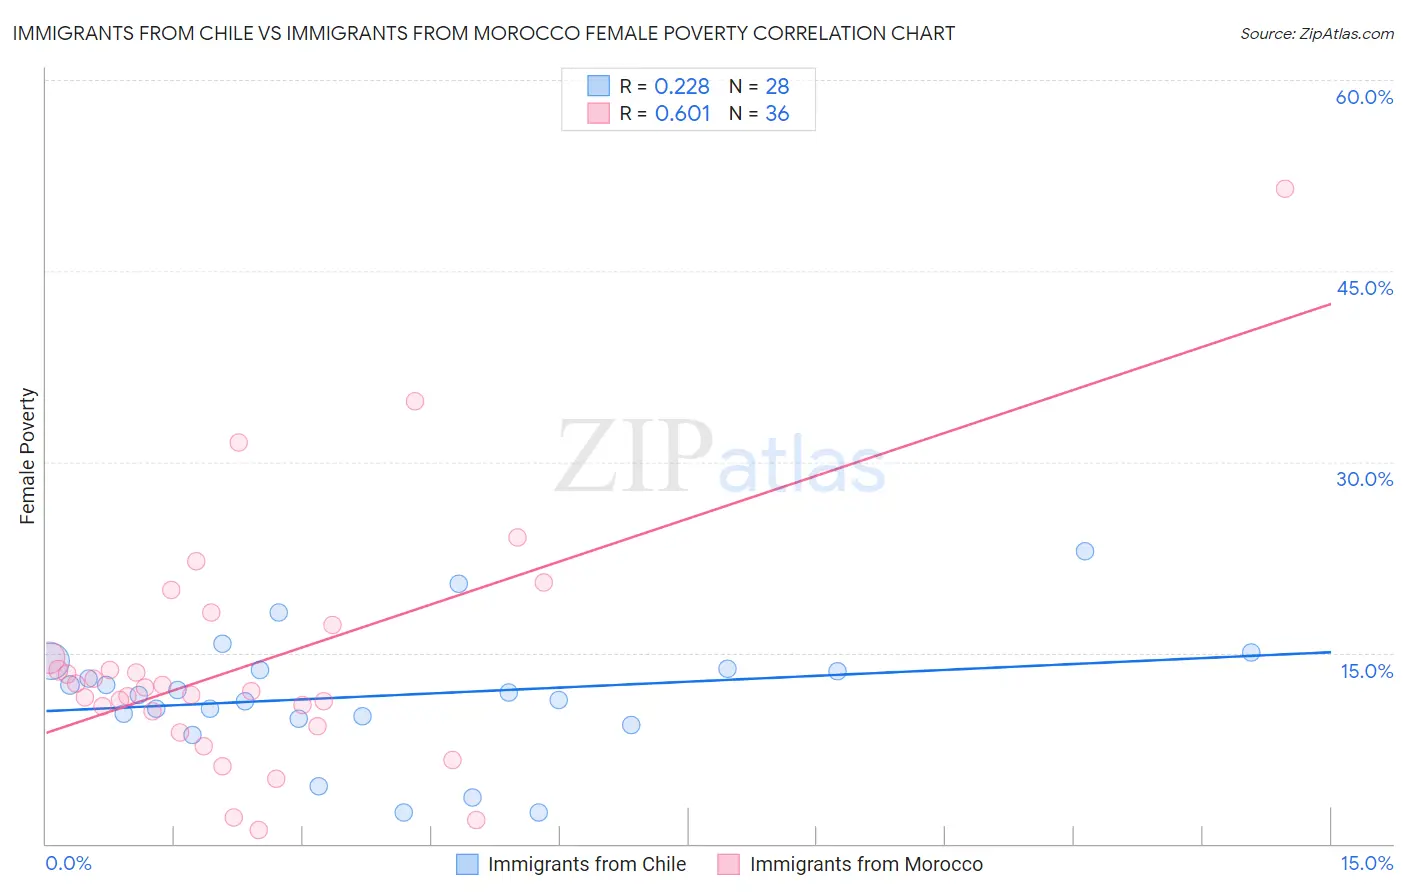 Immigrants from Chile vs Immigrants from Morocco Female Poverty